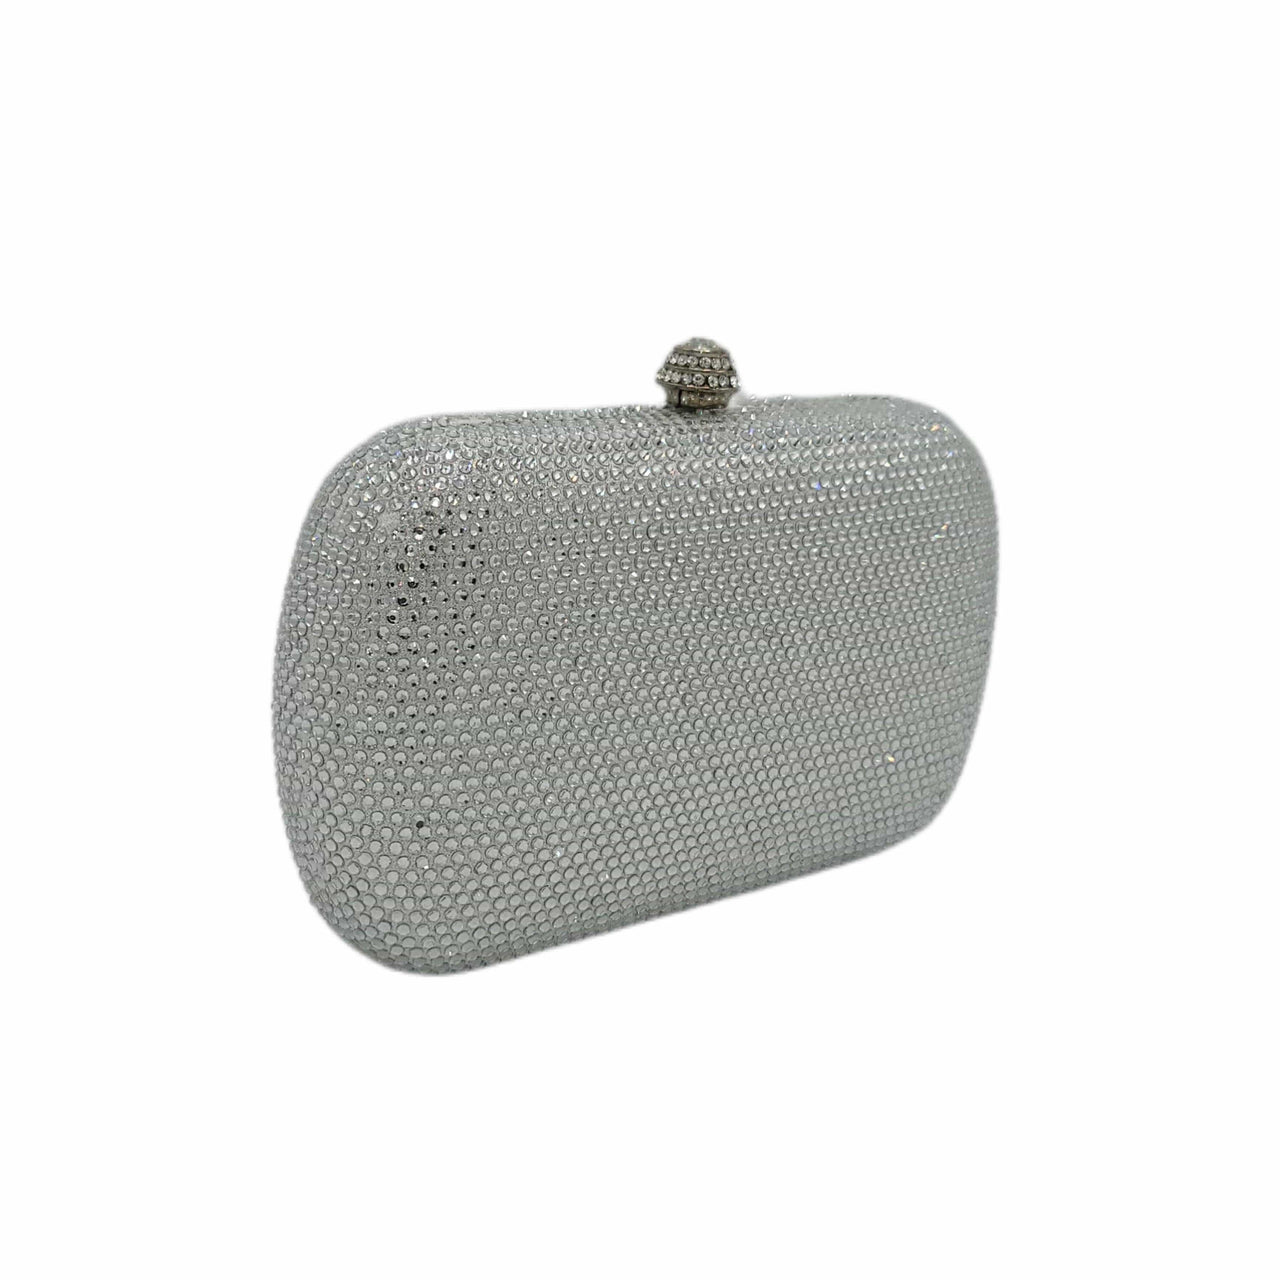 The Bag Couture Handbags, Wallets & Cases Stone Embellished Clutch 1 Silver